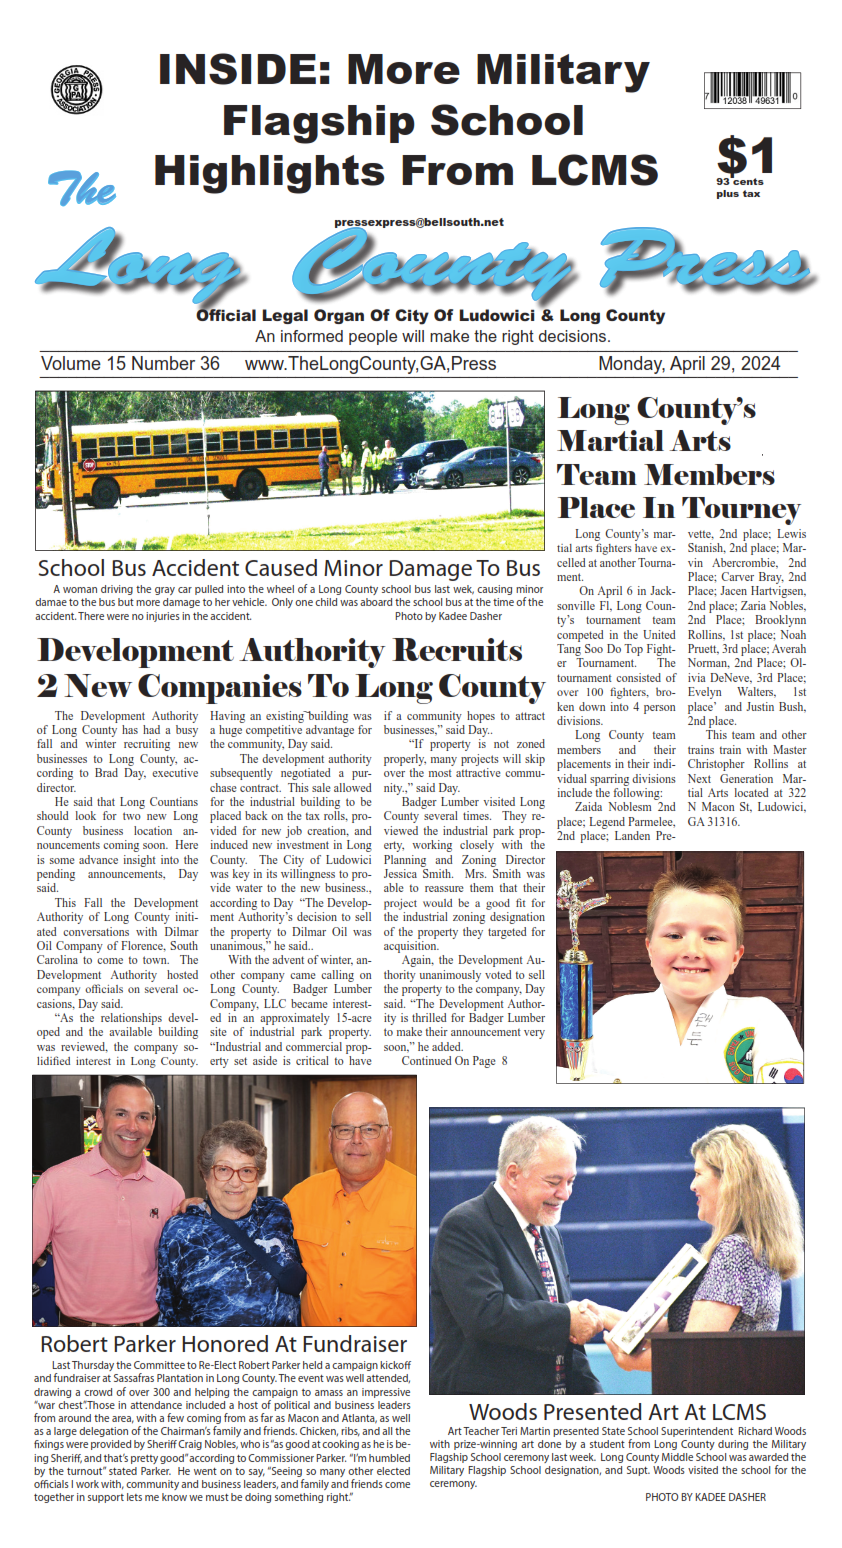 The front page of the long county press newspaper